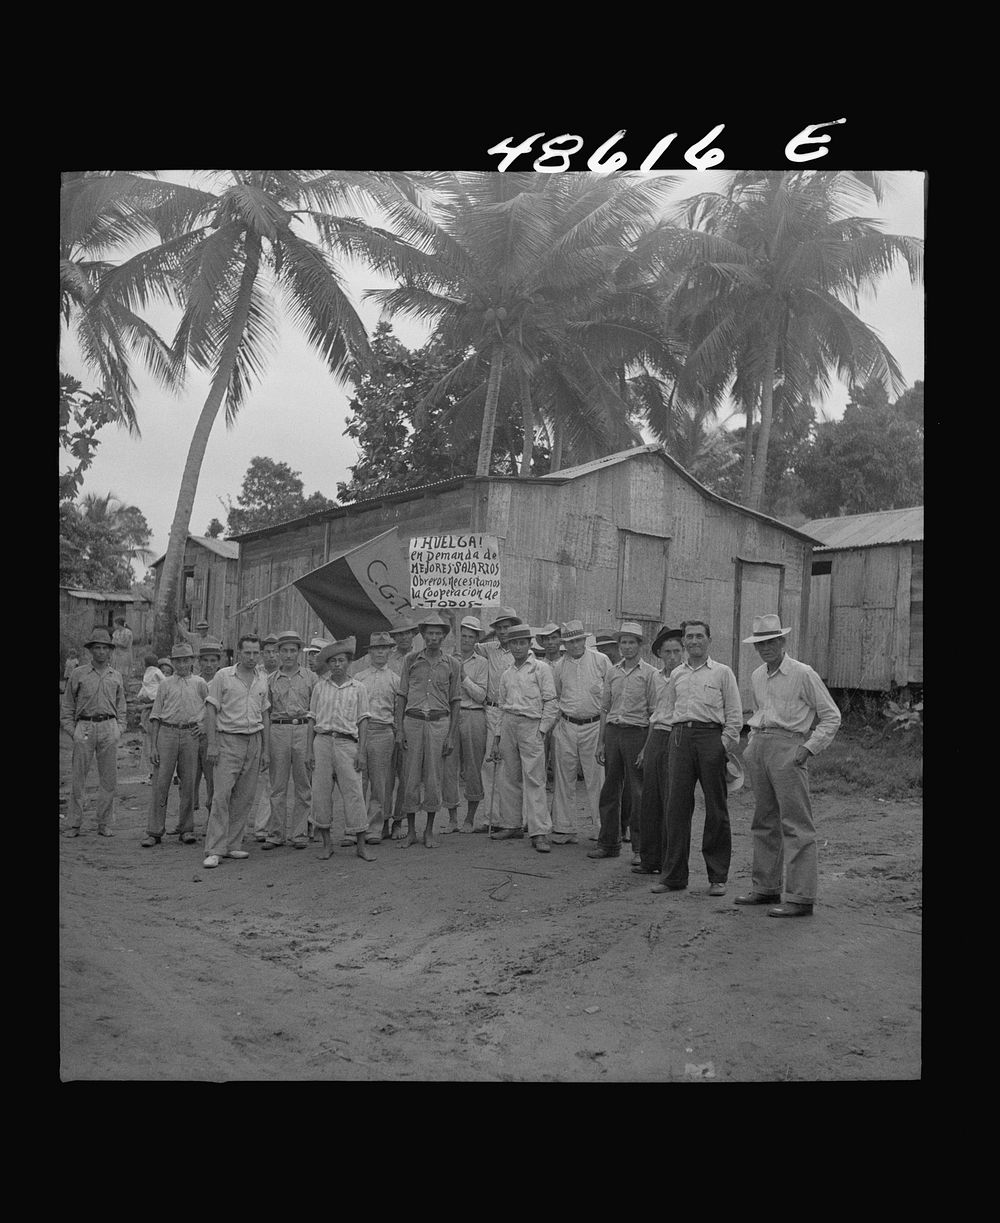 Yabucoa, Puerto Rico. Strikers picketing a sugar plantation. Sourced from the Library of Congress.